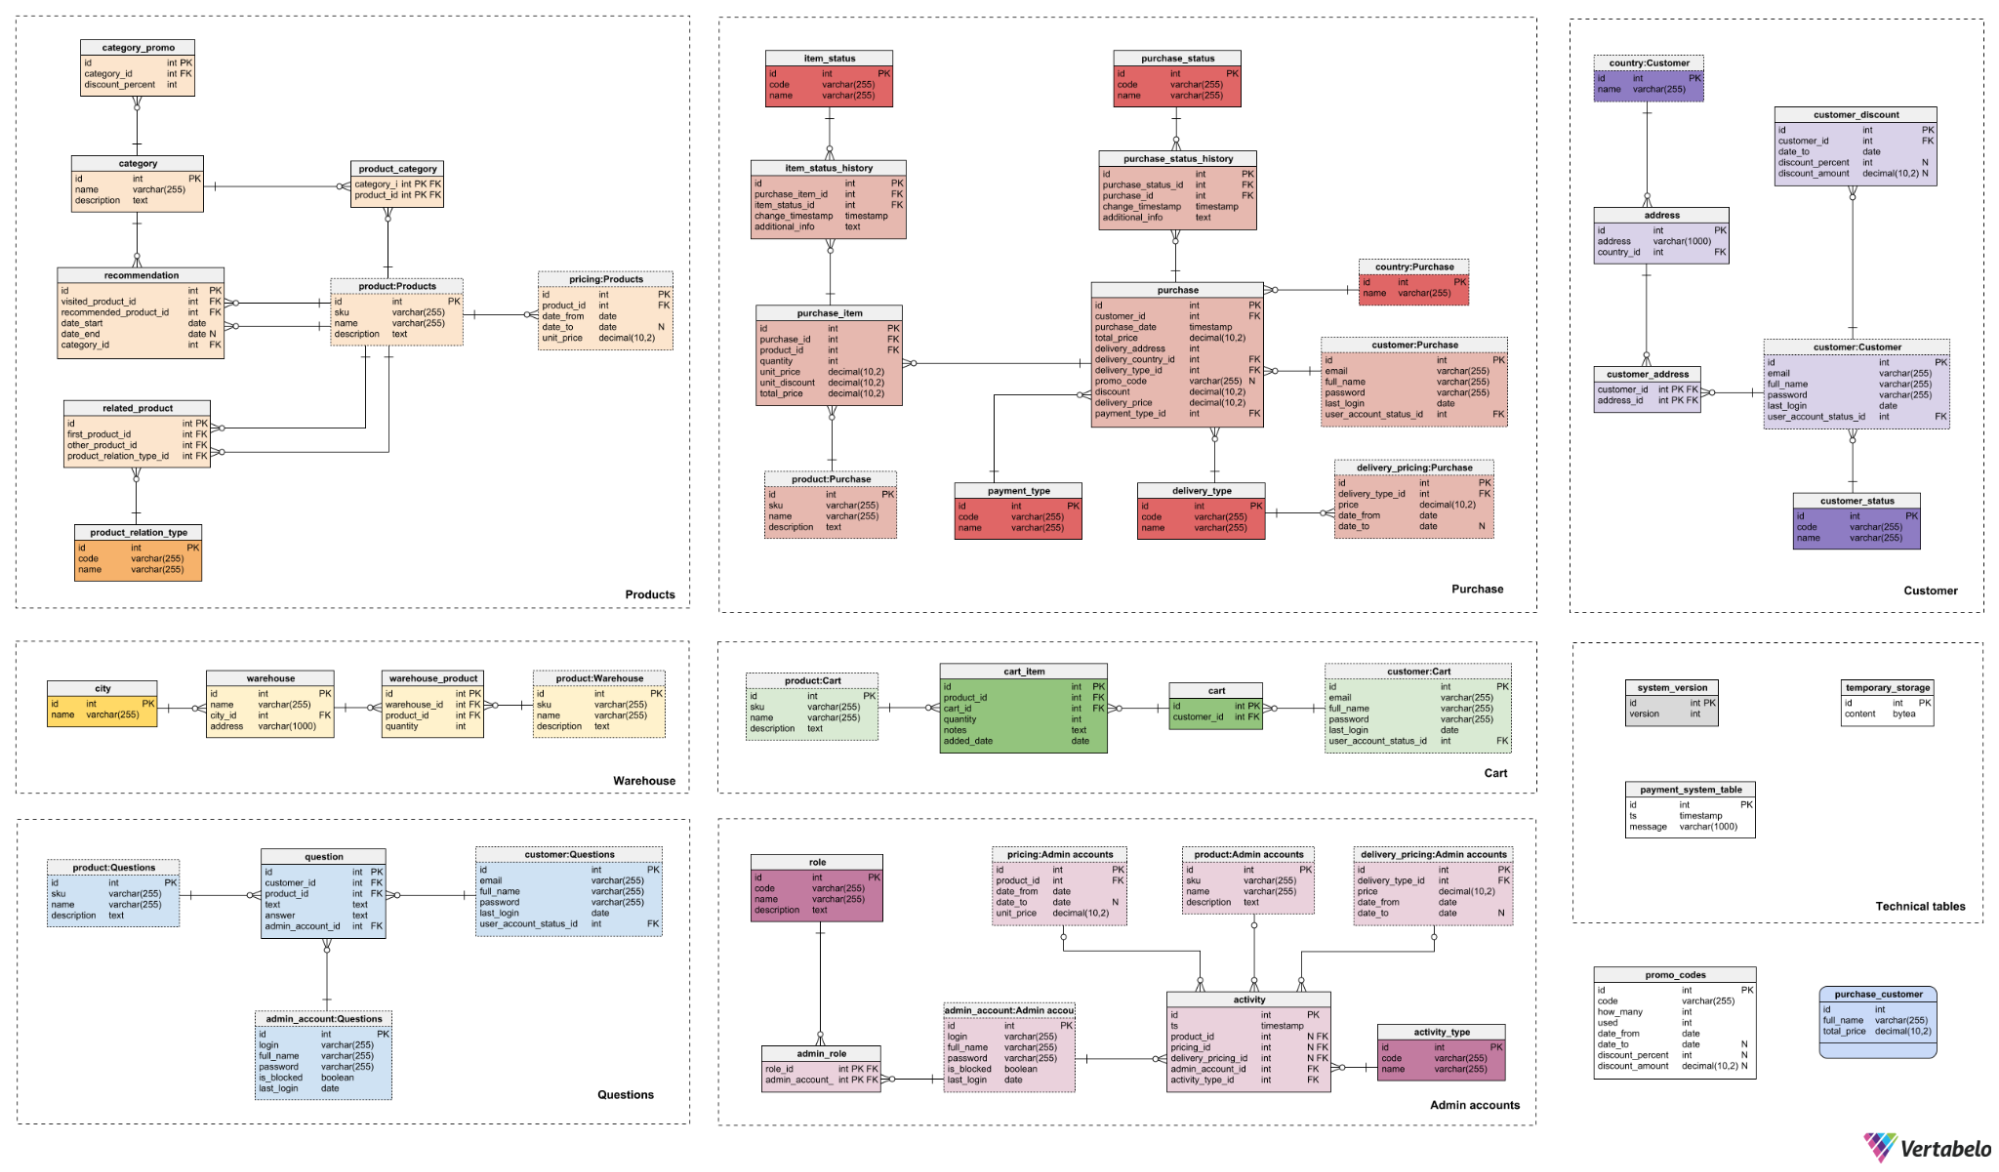 7 Tips to Improve Your Database Diagram Layout